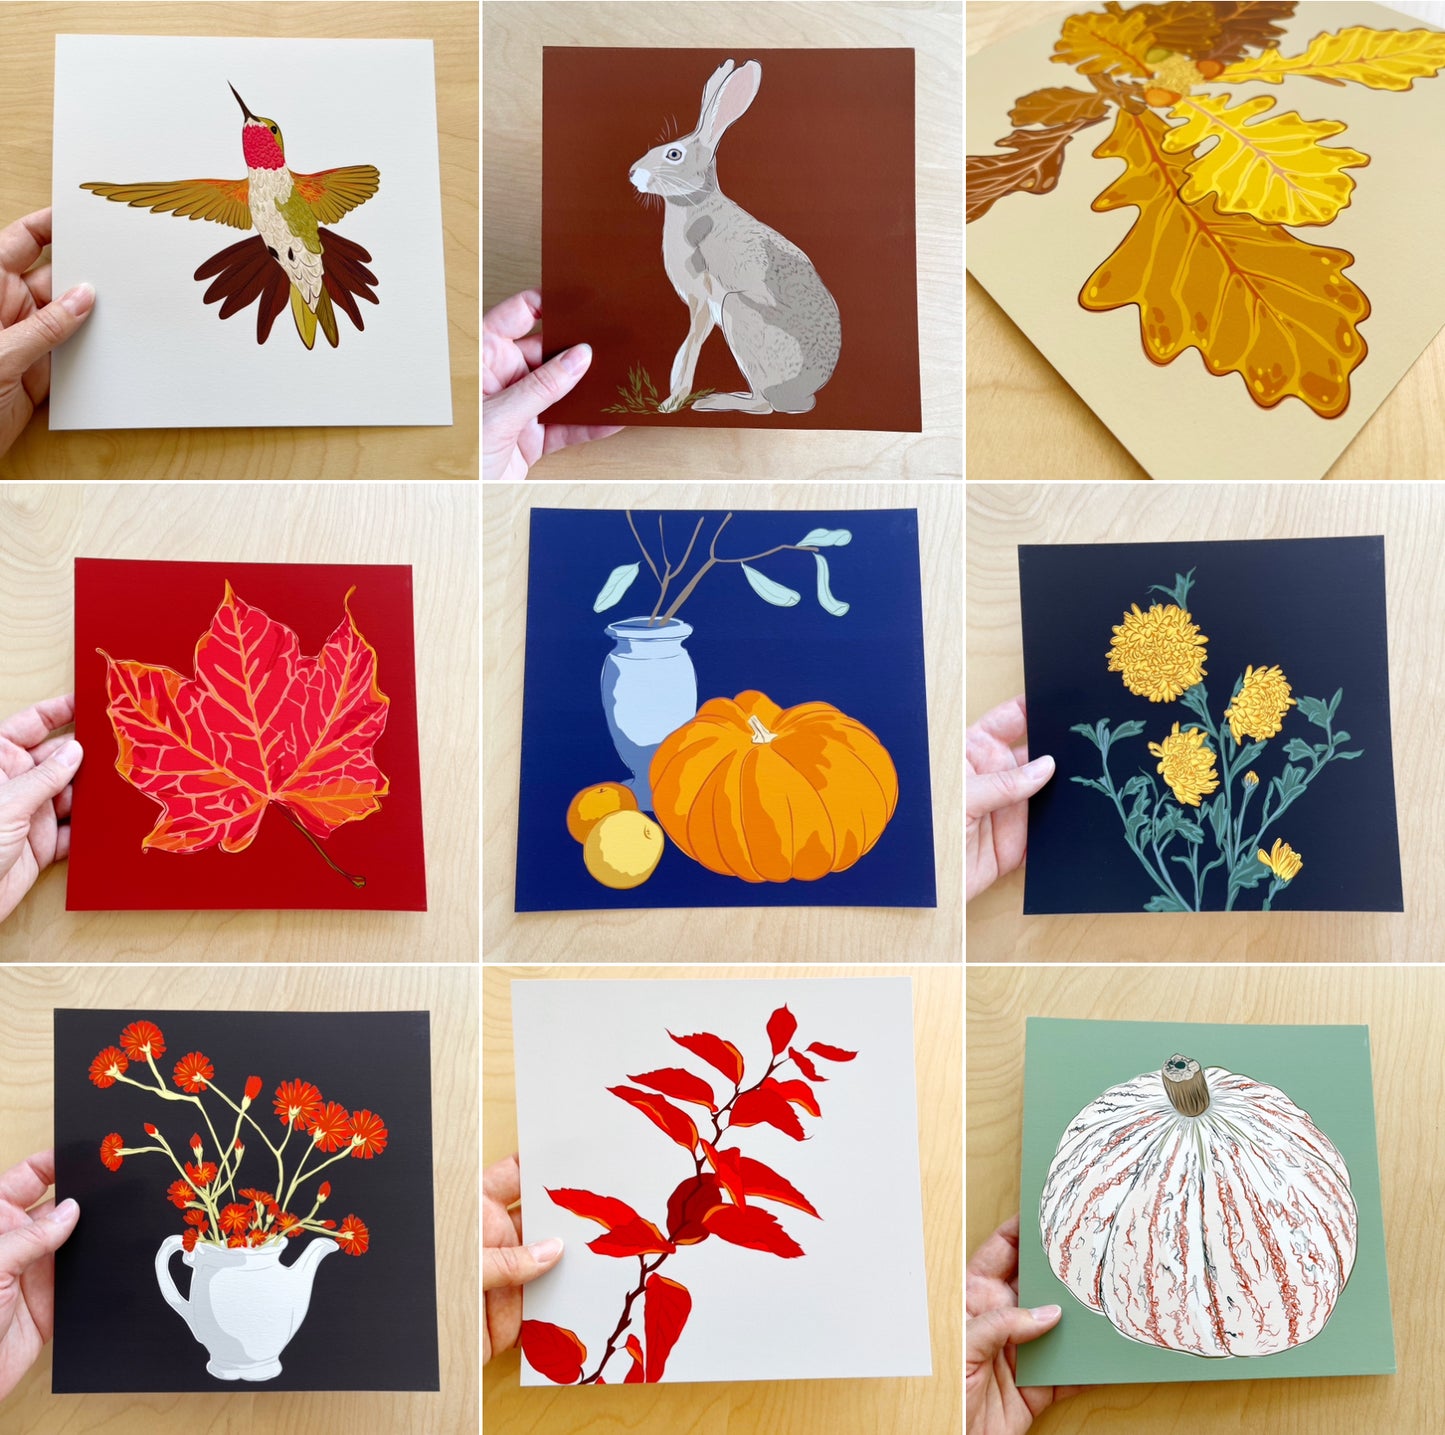 DB. 8x8” Prints of my autumn & creature drawings